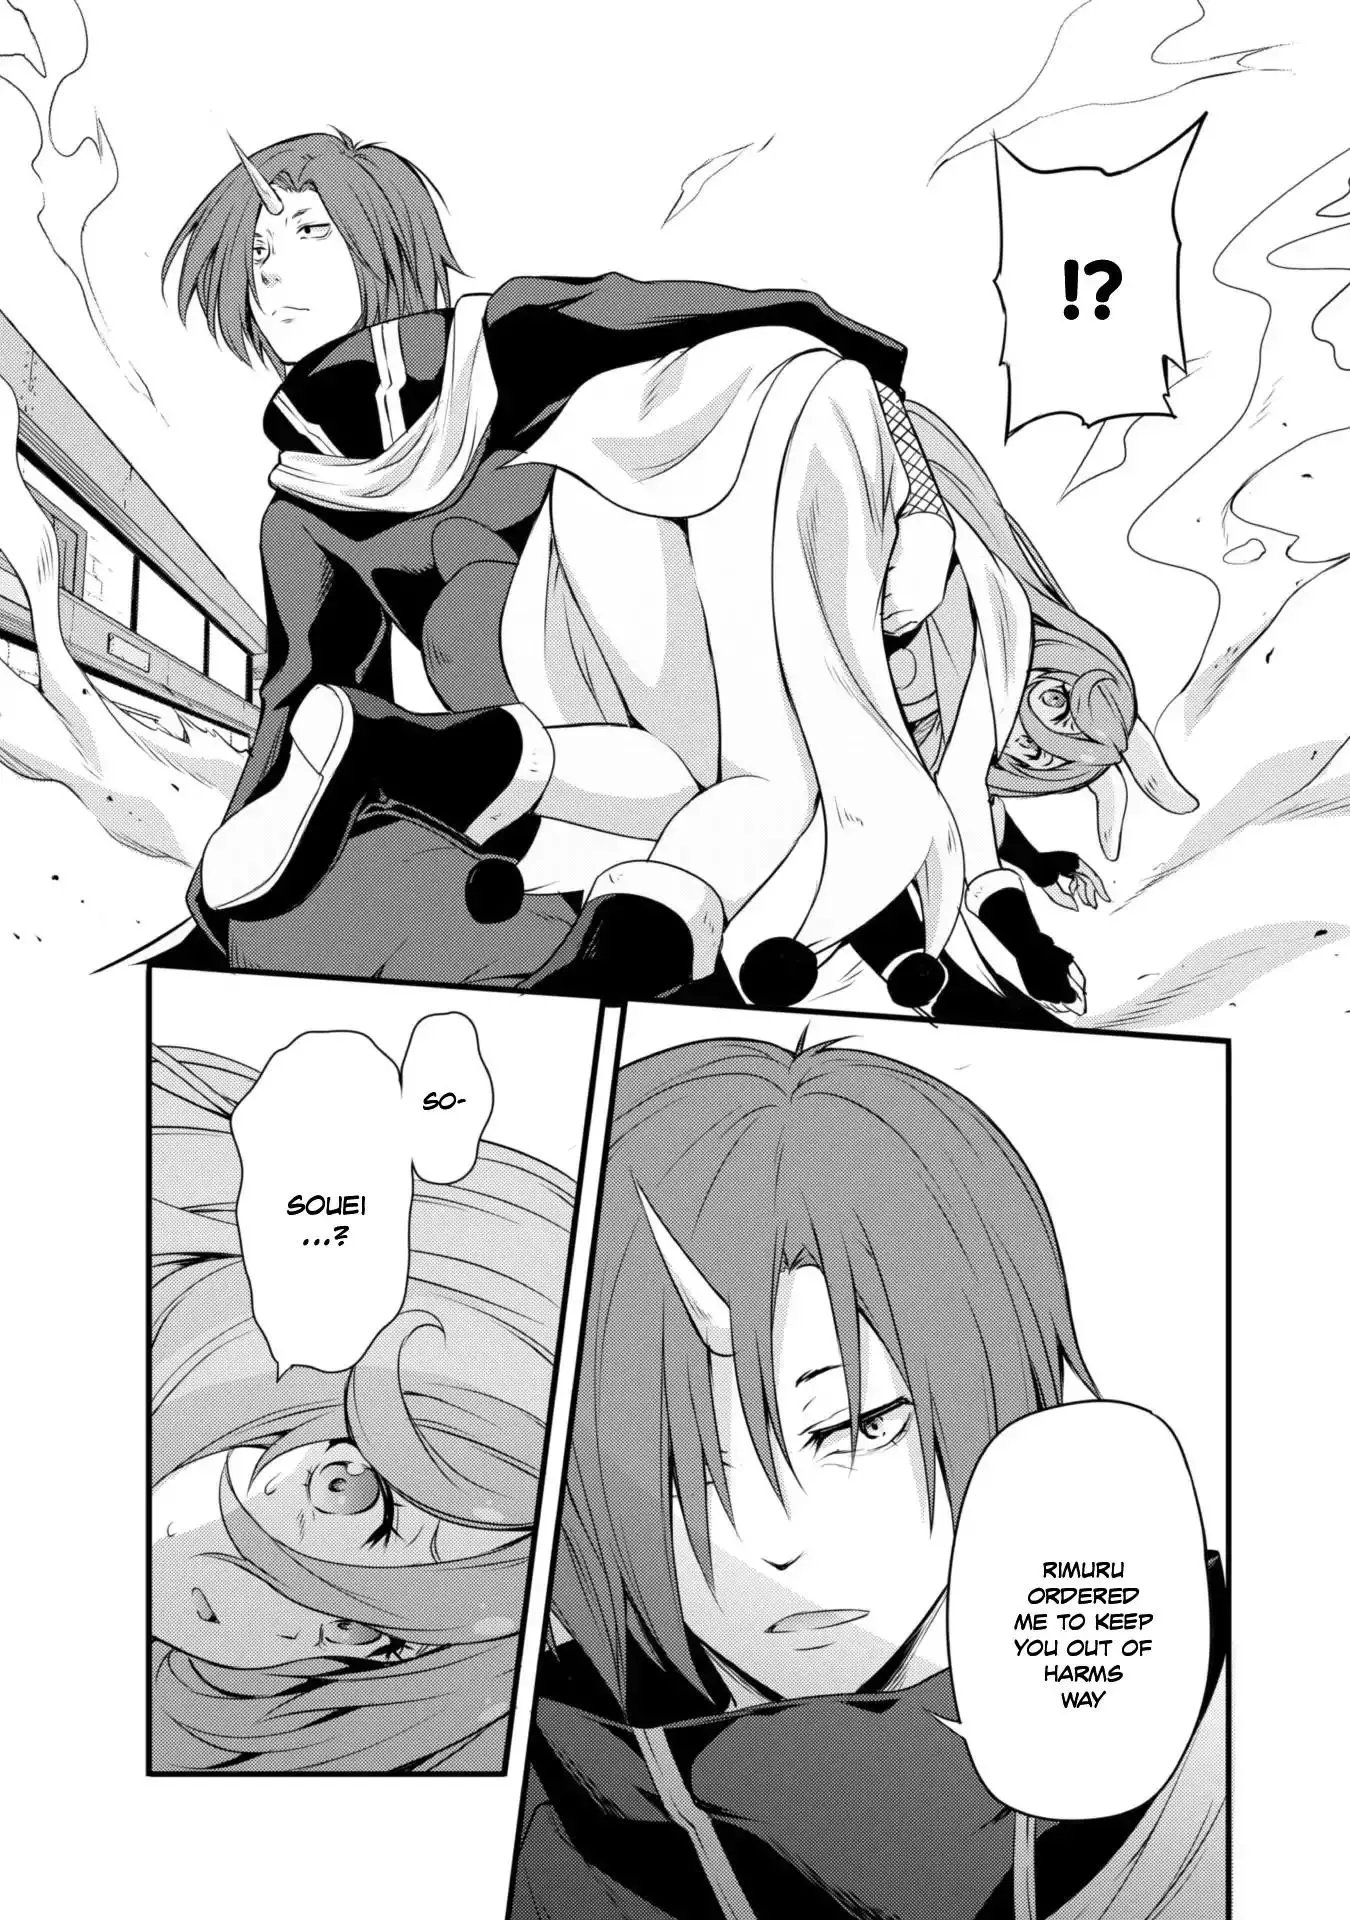 Tensei Shitara Slime Datta Ken: The Ways of Strolling in the Demon Country - 11 page 22